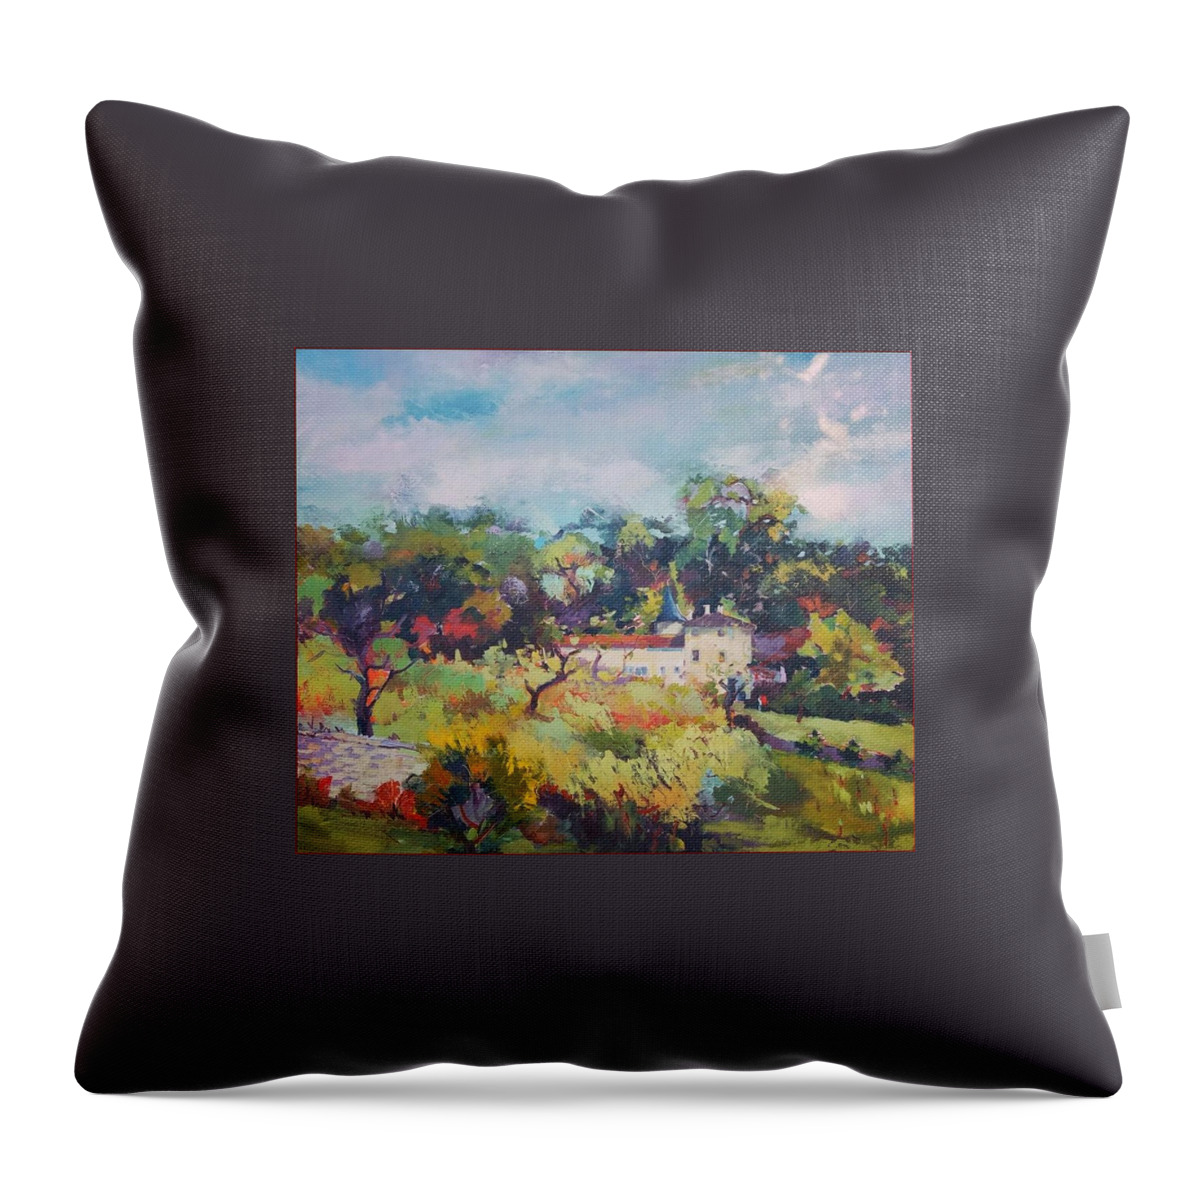  Throw Pillow featuring the painting Fleac 2017 by Kim PARDON